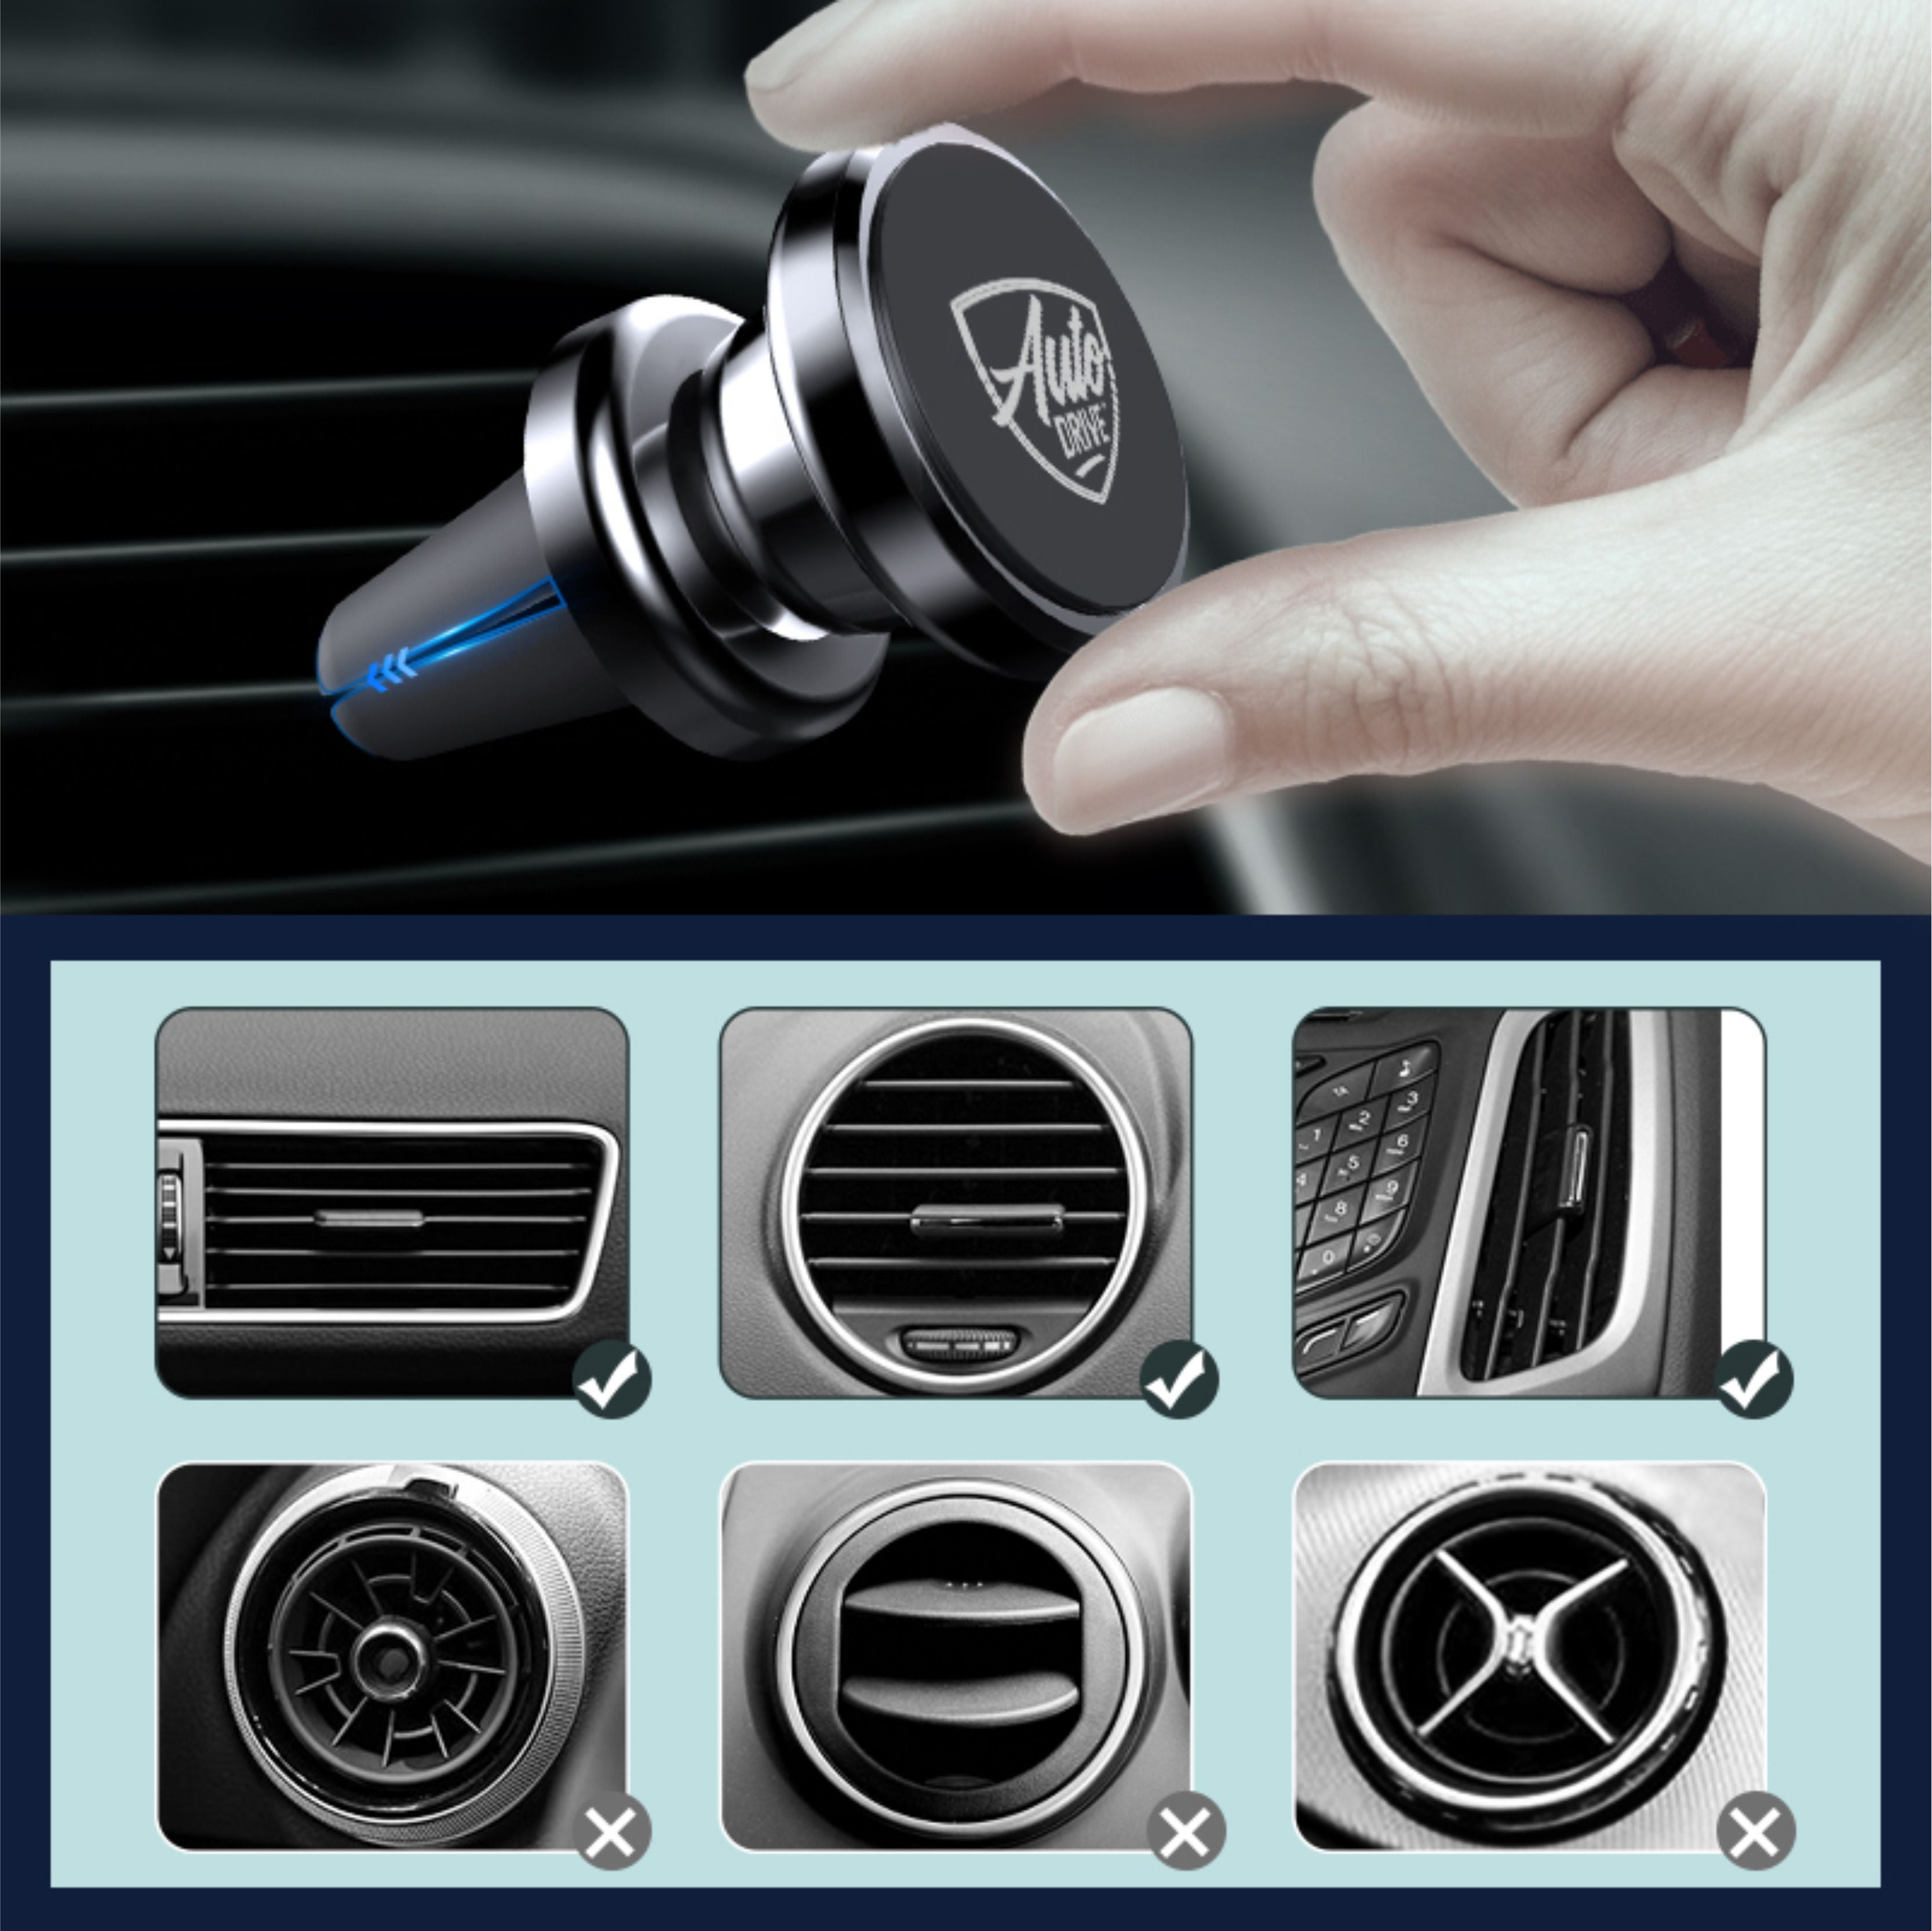 Auto Drive Magnetic Air Vent Mount Phone Holder with Stable Hook and  Built-in Four Strong Magnets